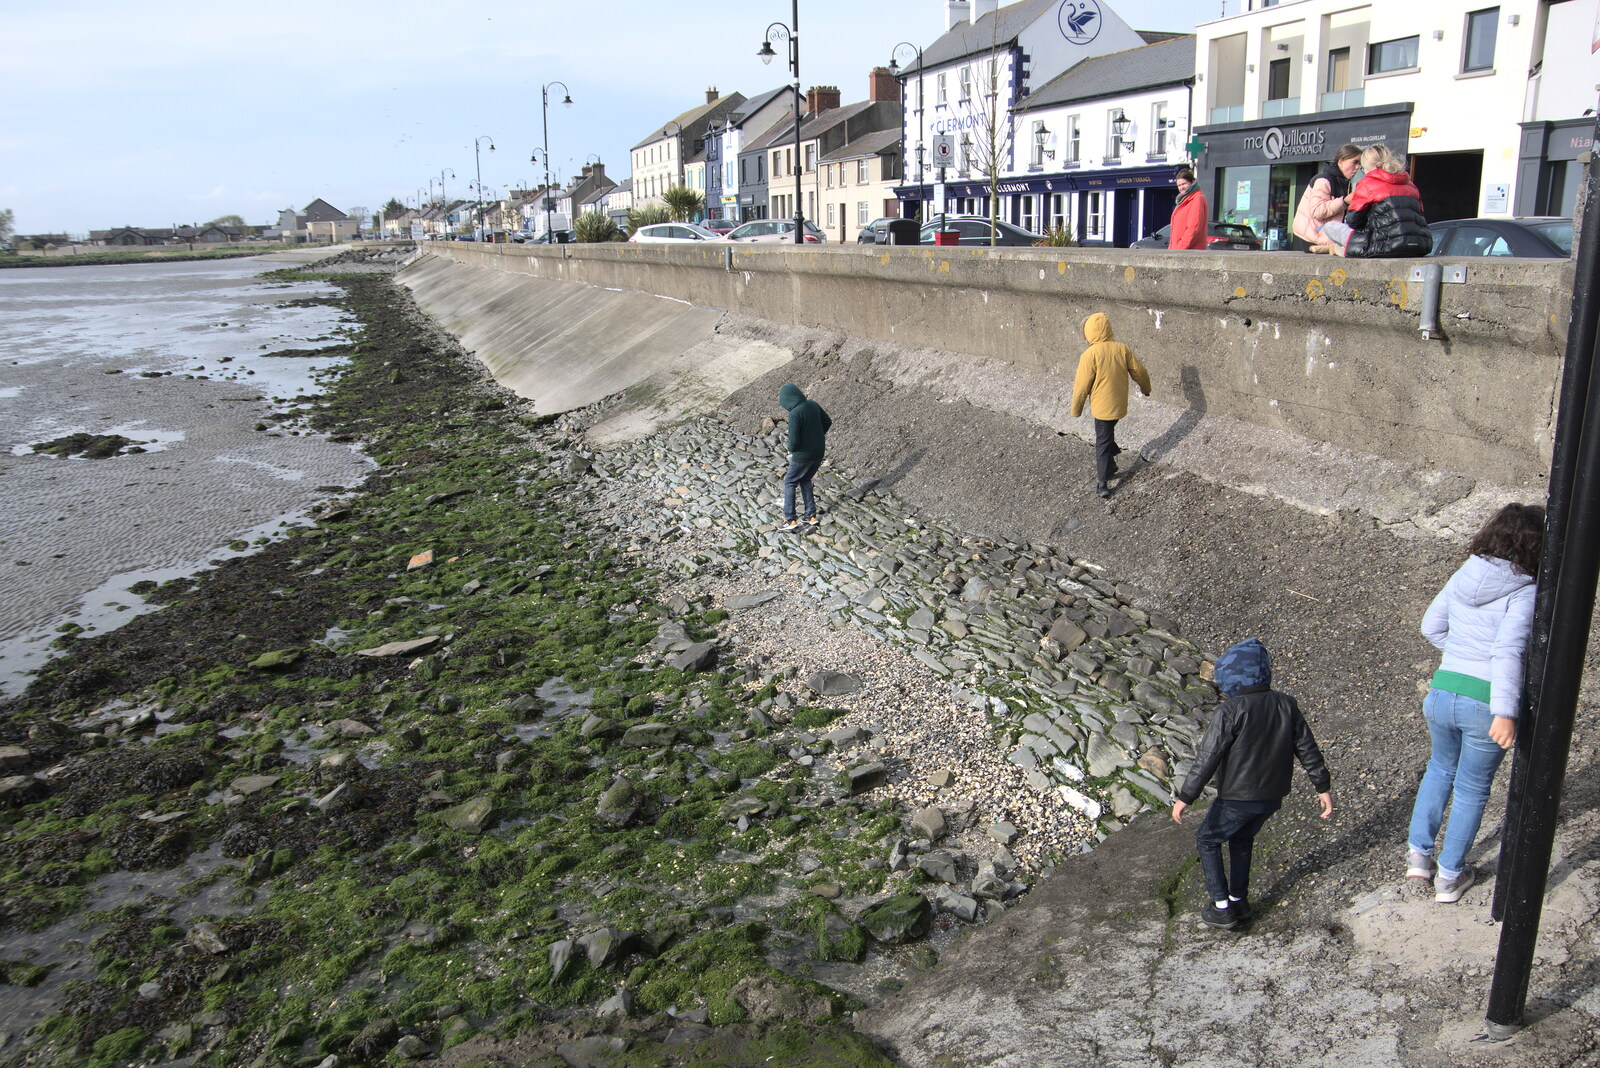 Blackrock North and South, Louth and County Dublin, Ireland - 23rd April 2022: Fred and Harry climb down to the beach